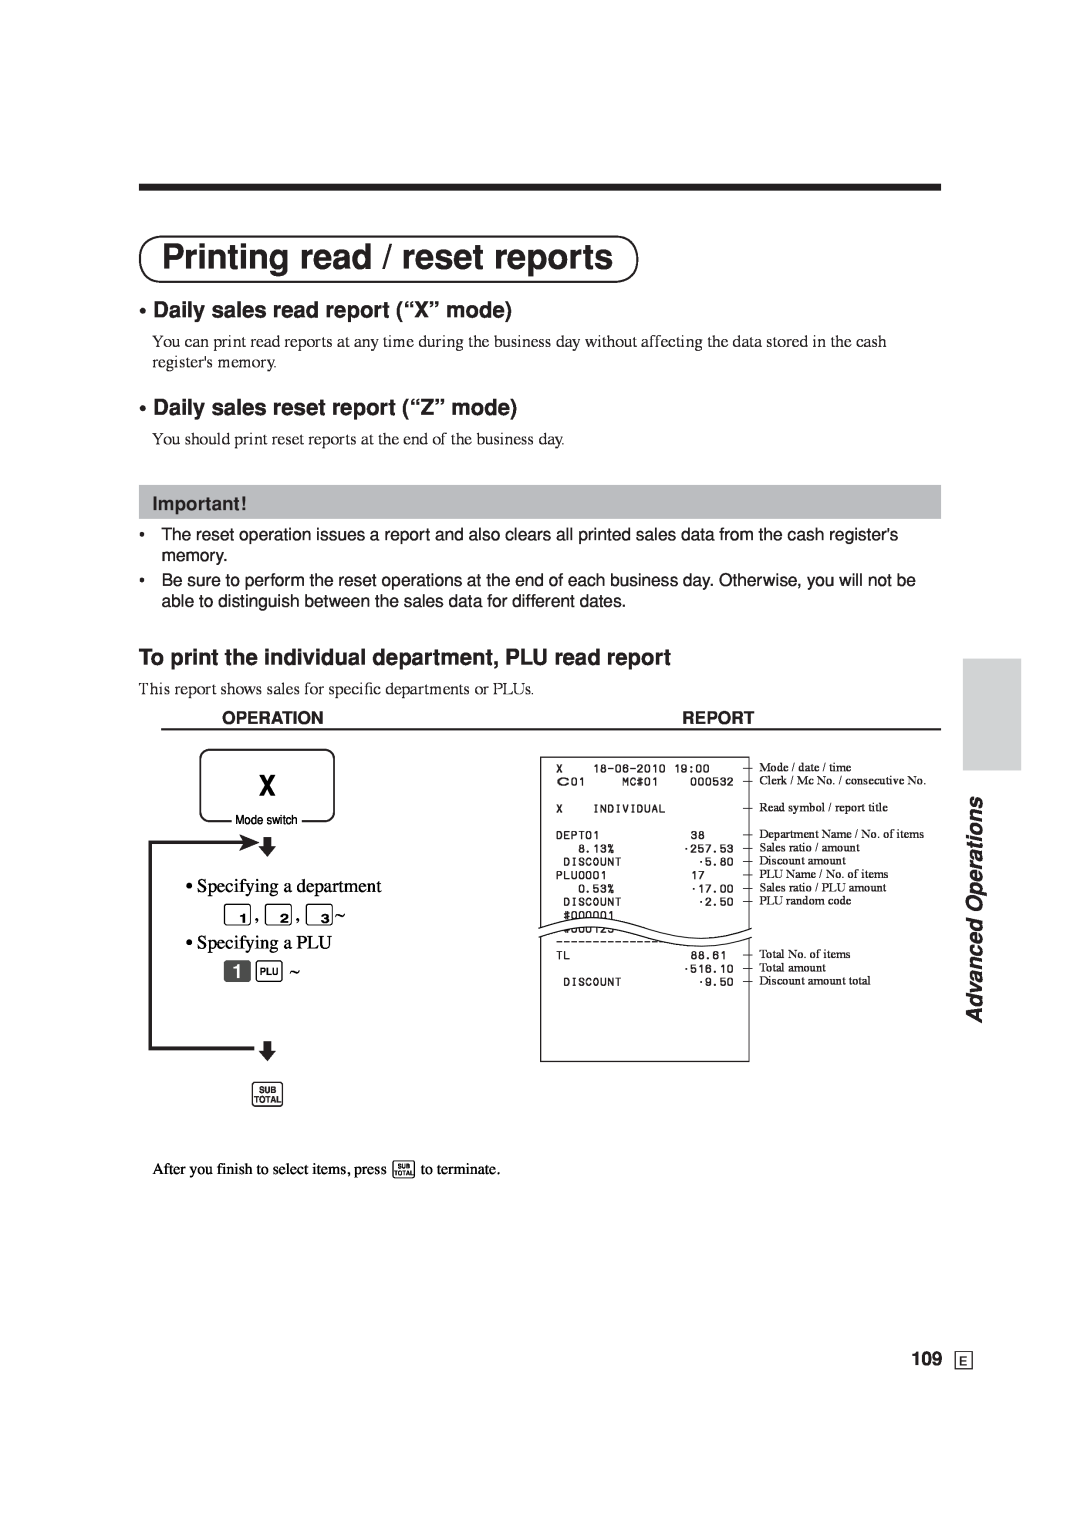 Casio SE-C6000 Printing read / reset reports, Daily sales read report “X” mode, Daily sales reset report “Z” mode 